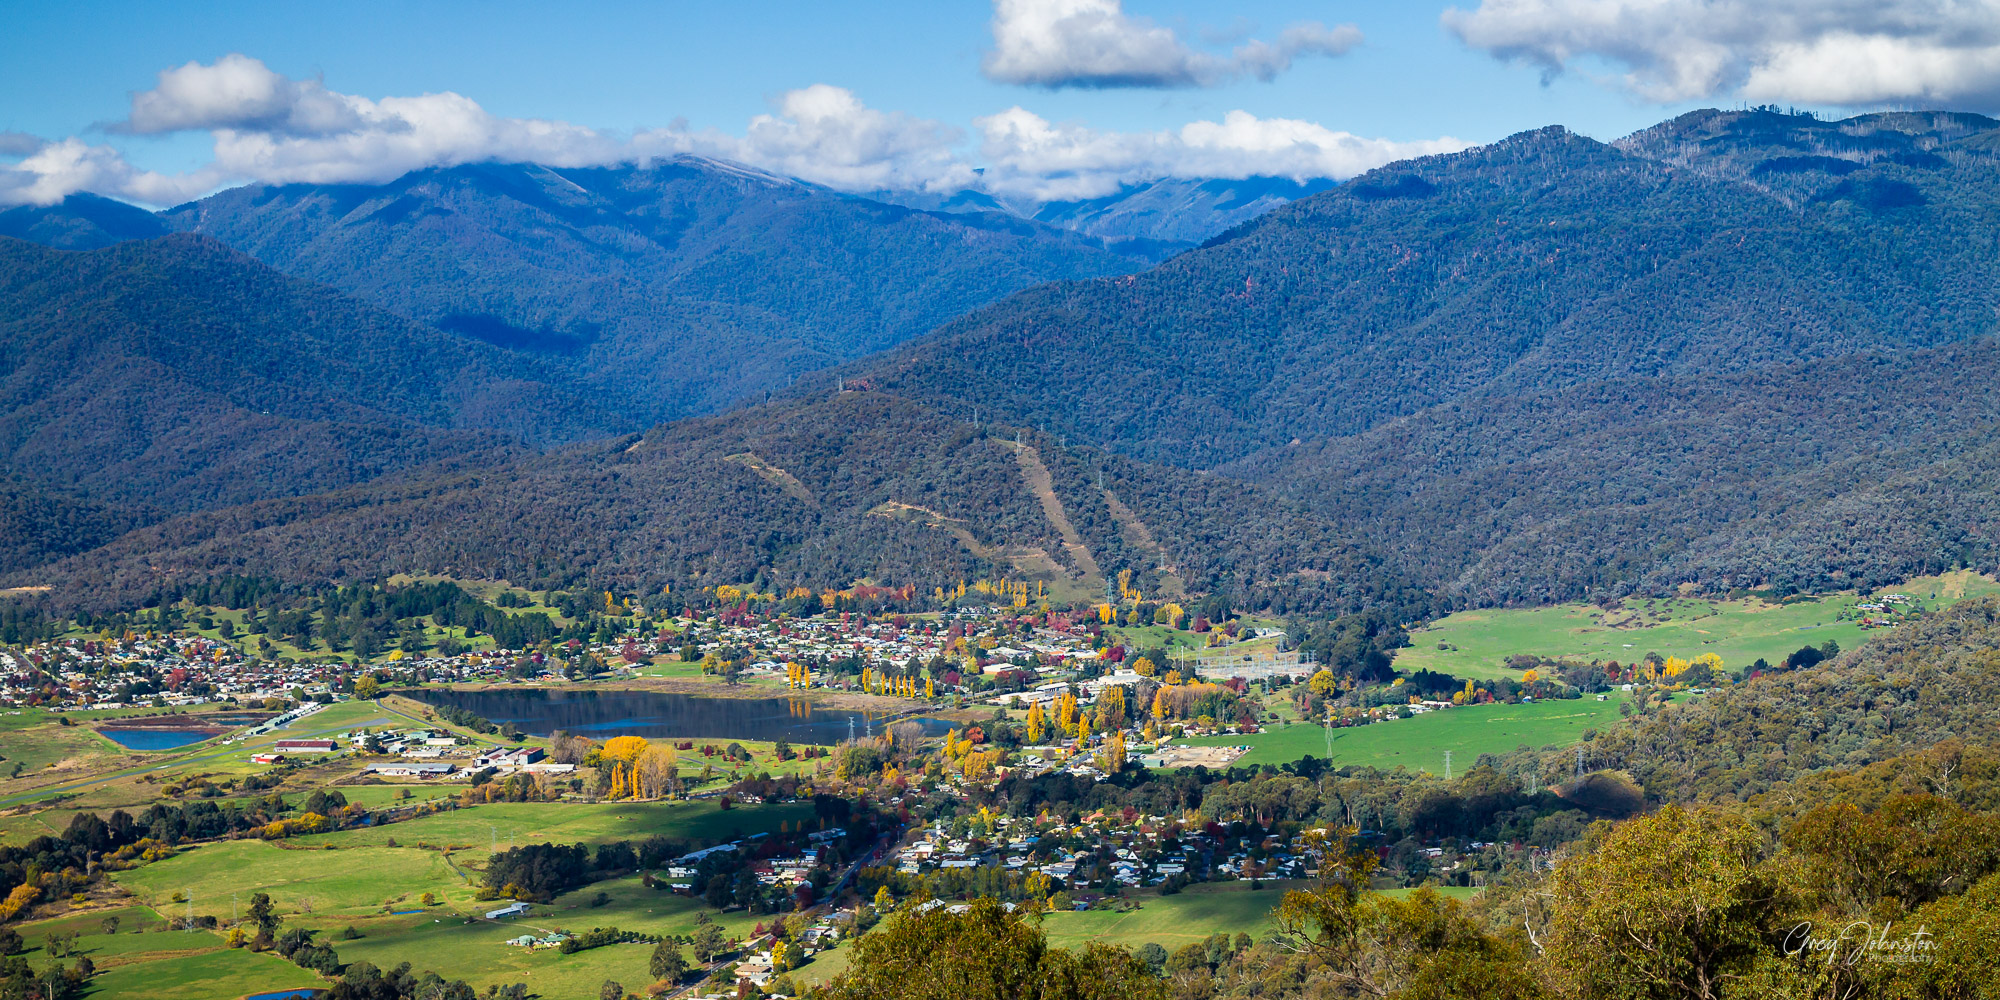 Pilot missing in Victorian high country